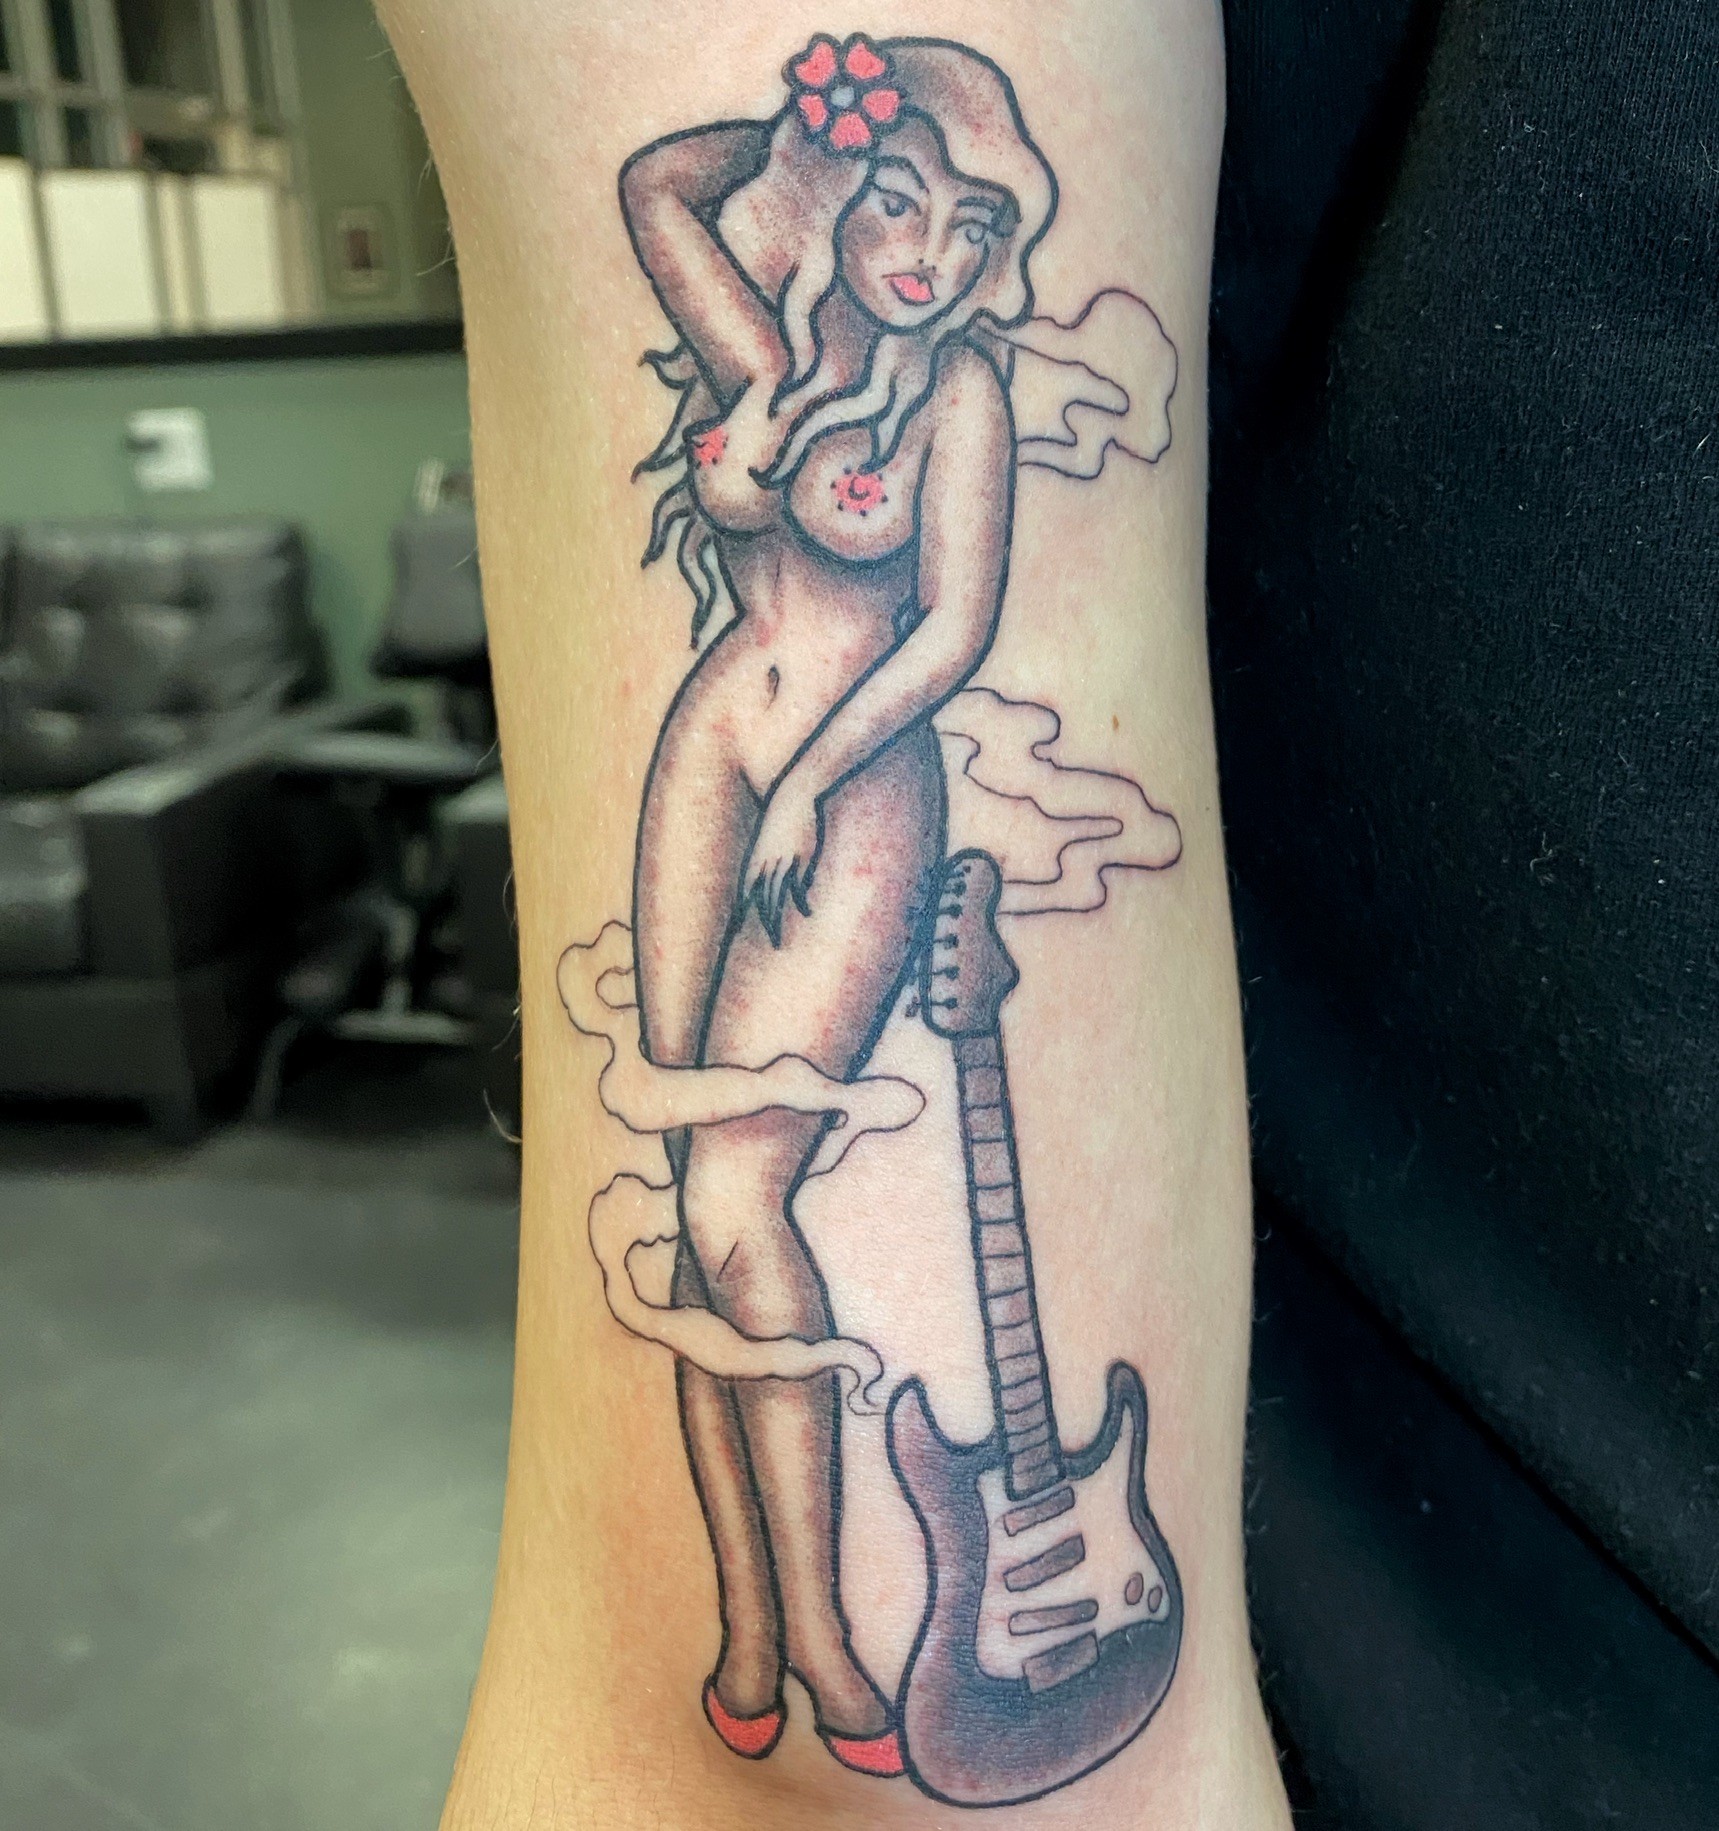 A woman with a guitar tattoo on her arm.